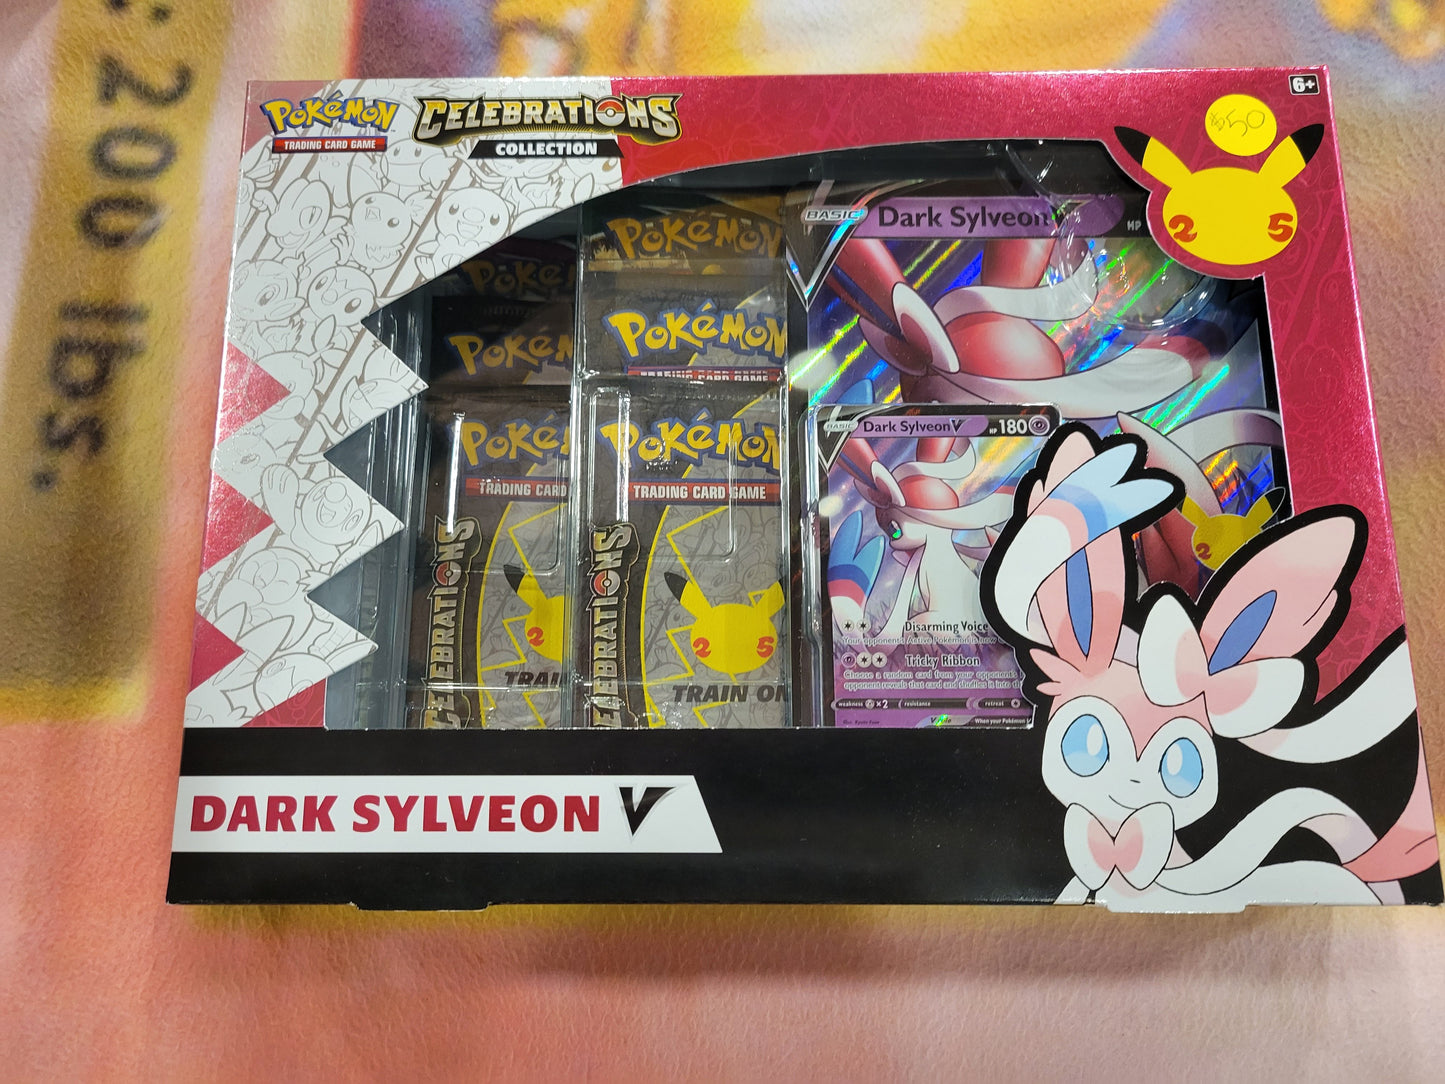 Each Dark Sylveon box comes with one oversized Dark Sylveon card, one Celebrations Dark Sylveon card, one online code card, two tcg packs, and four Celebrations packs.